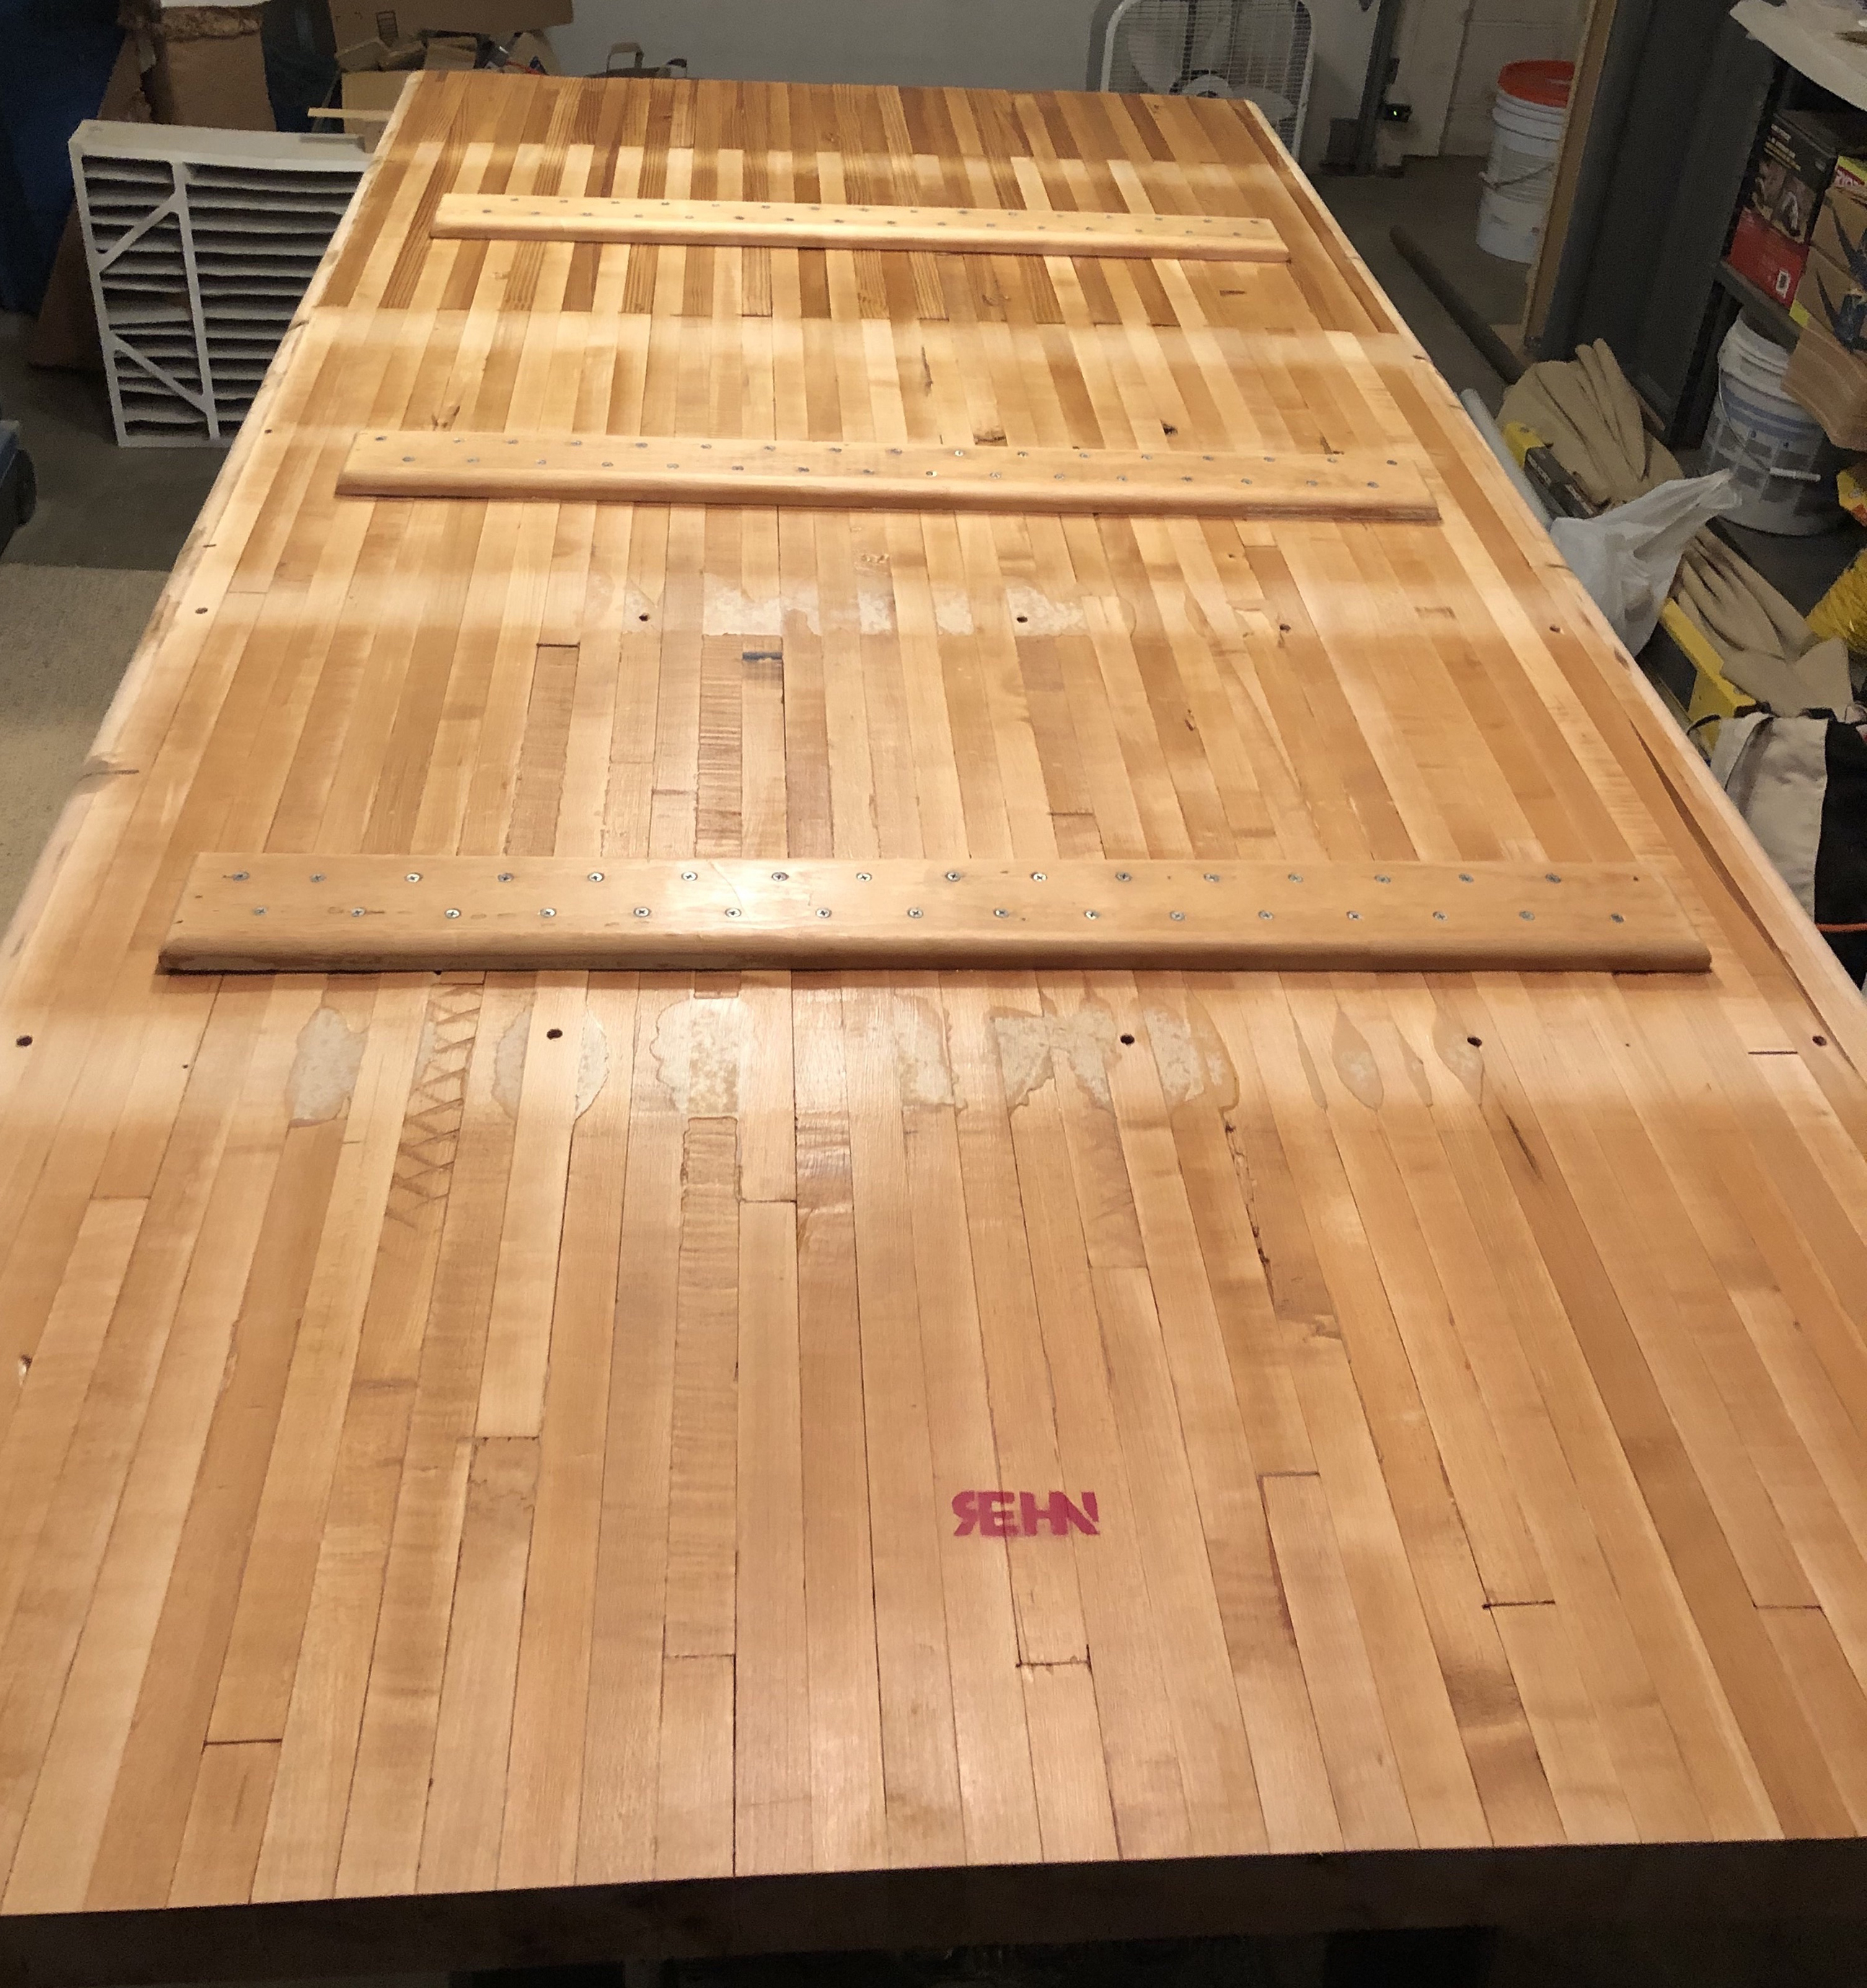 Underside of the table in a nearly completed state